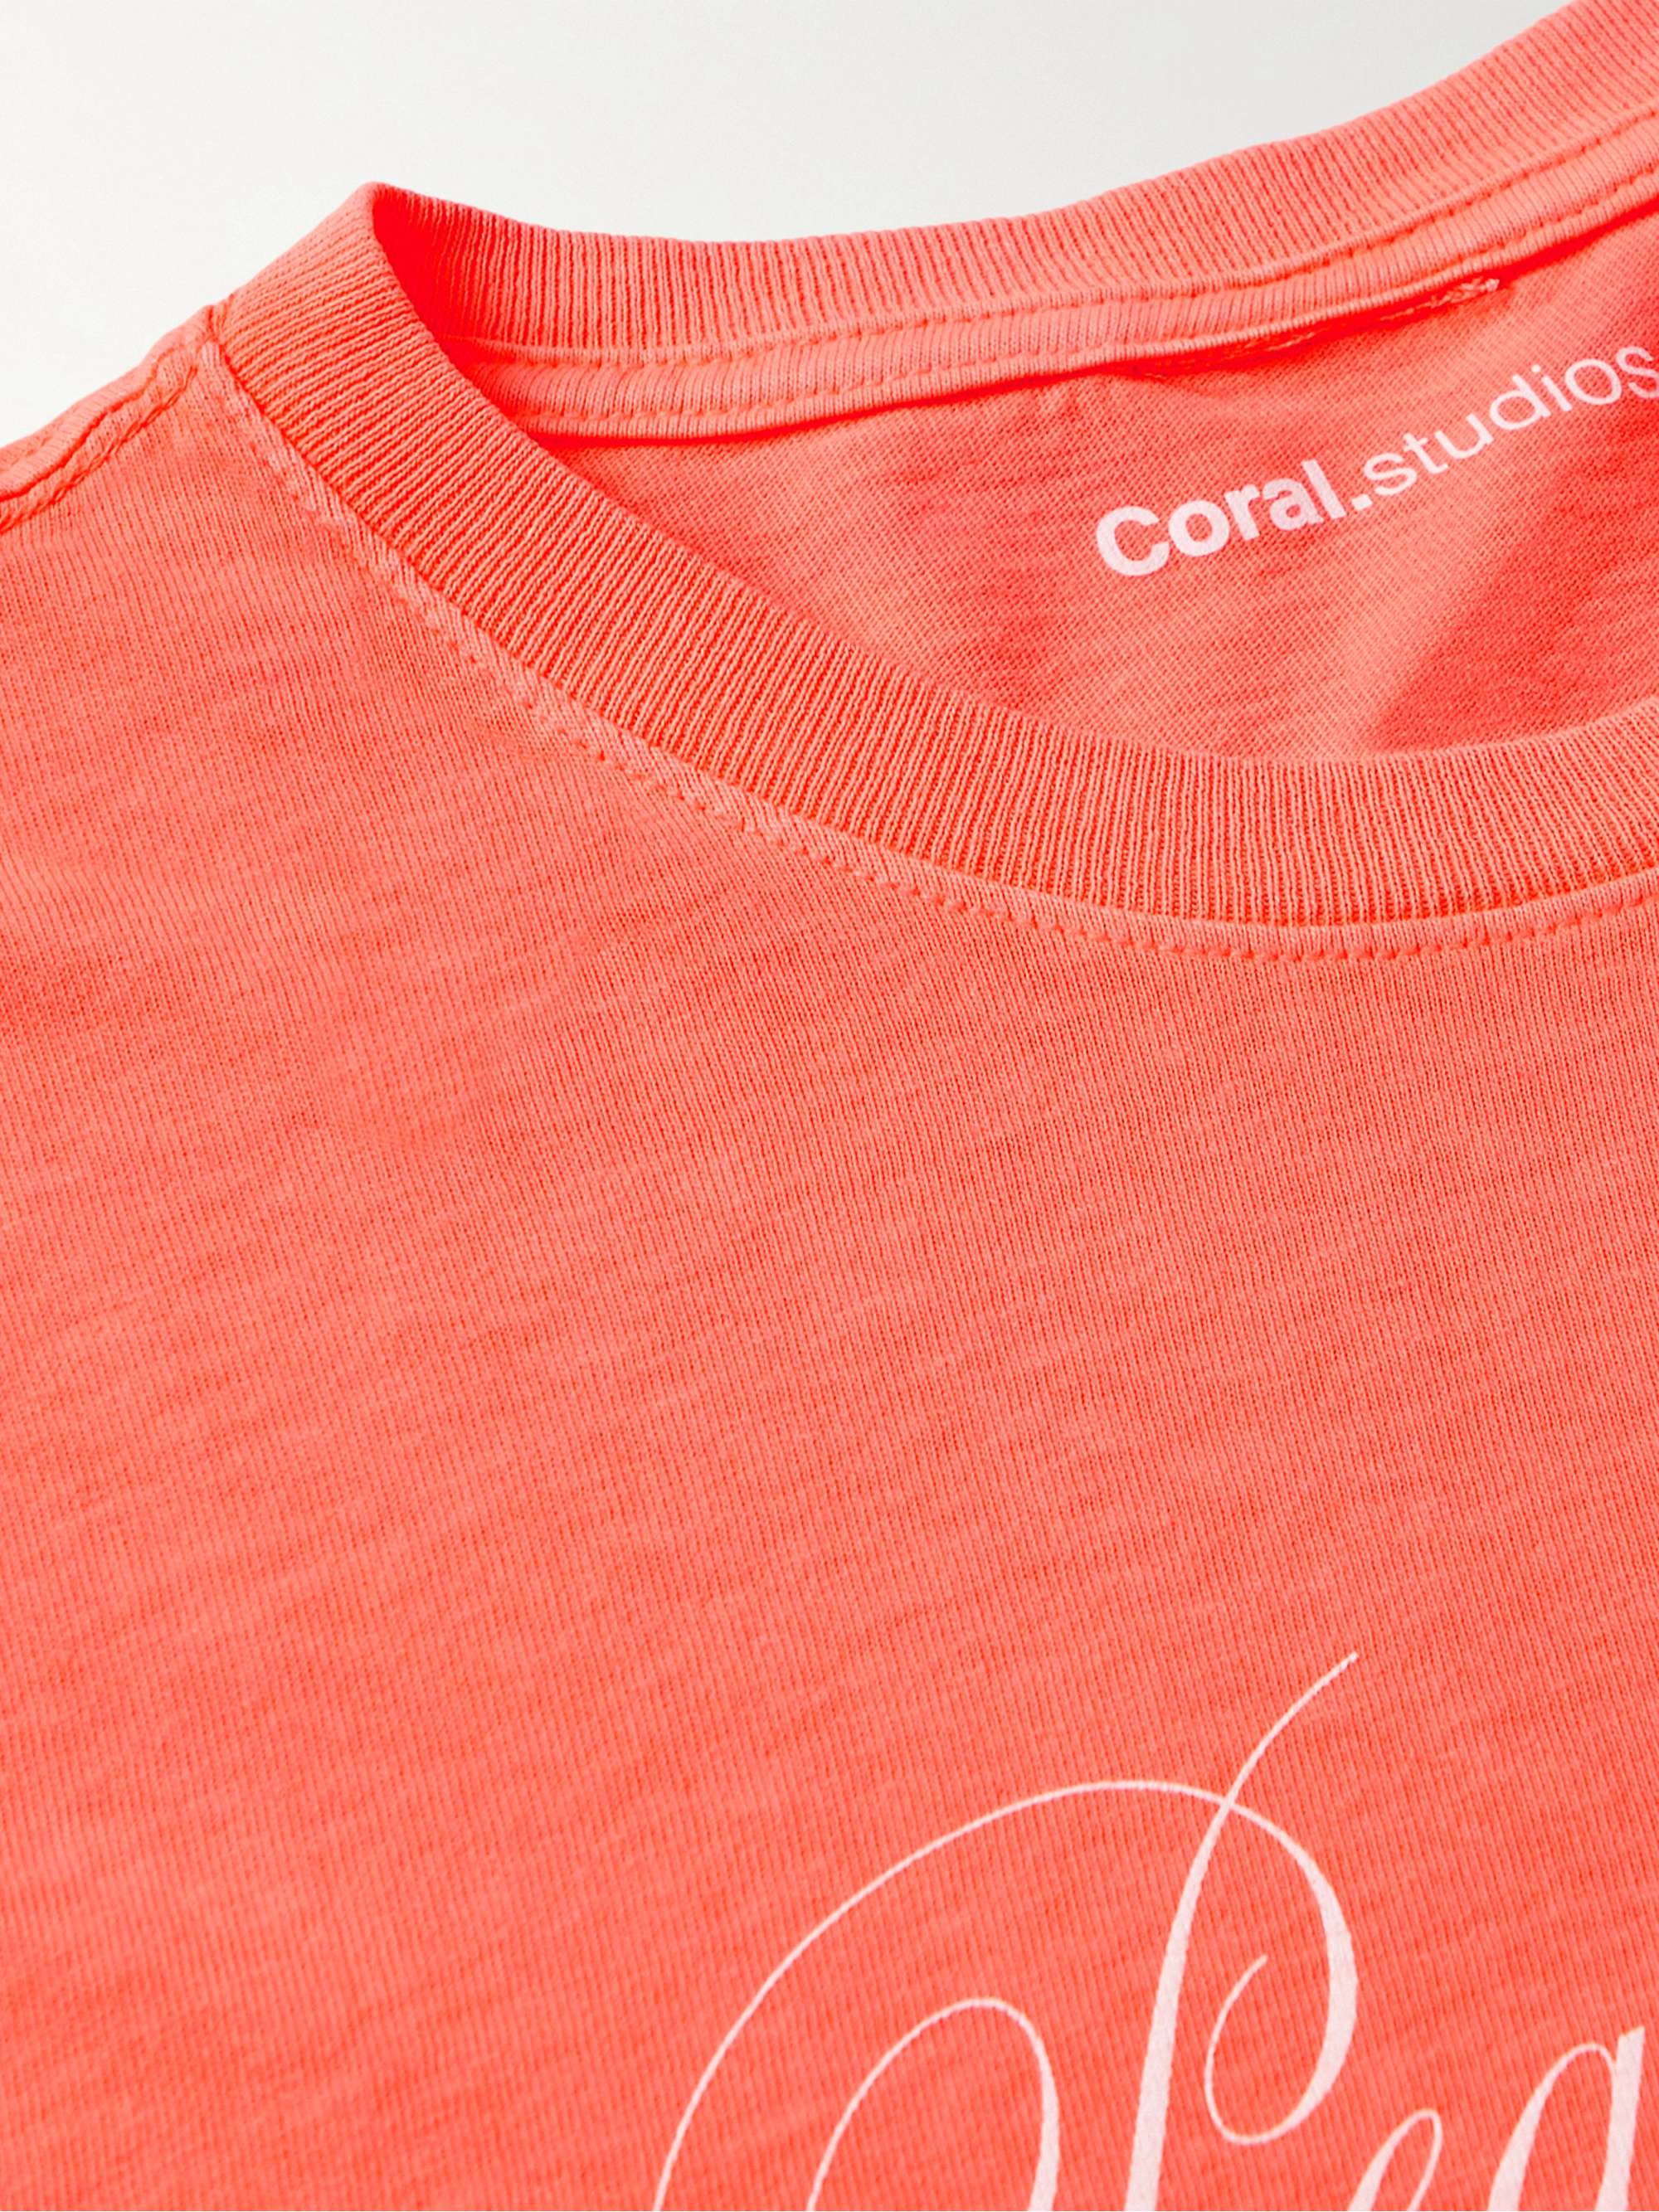 CORAL STUDIOS Printed Cotton-Jersey T-Shirt